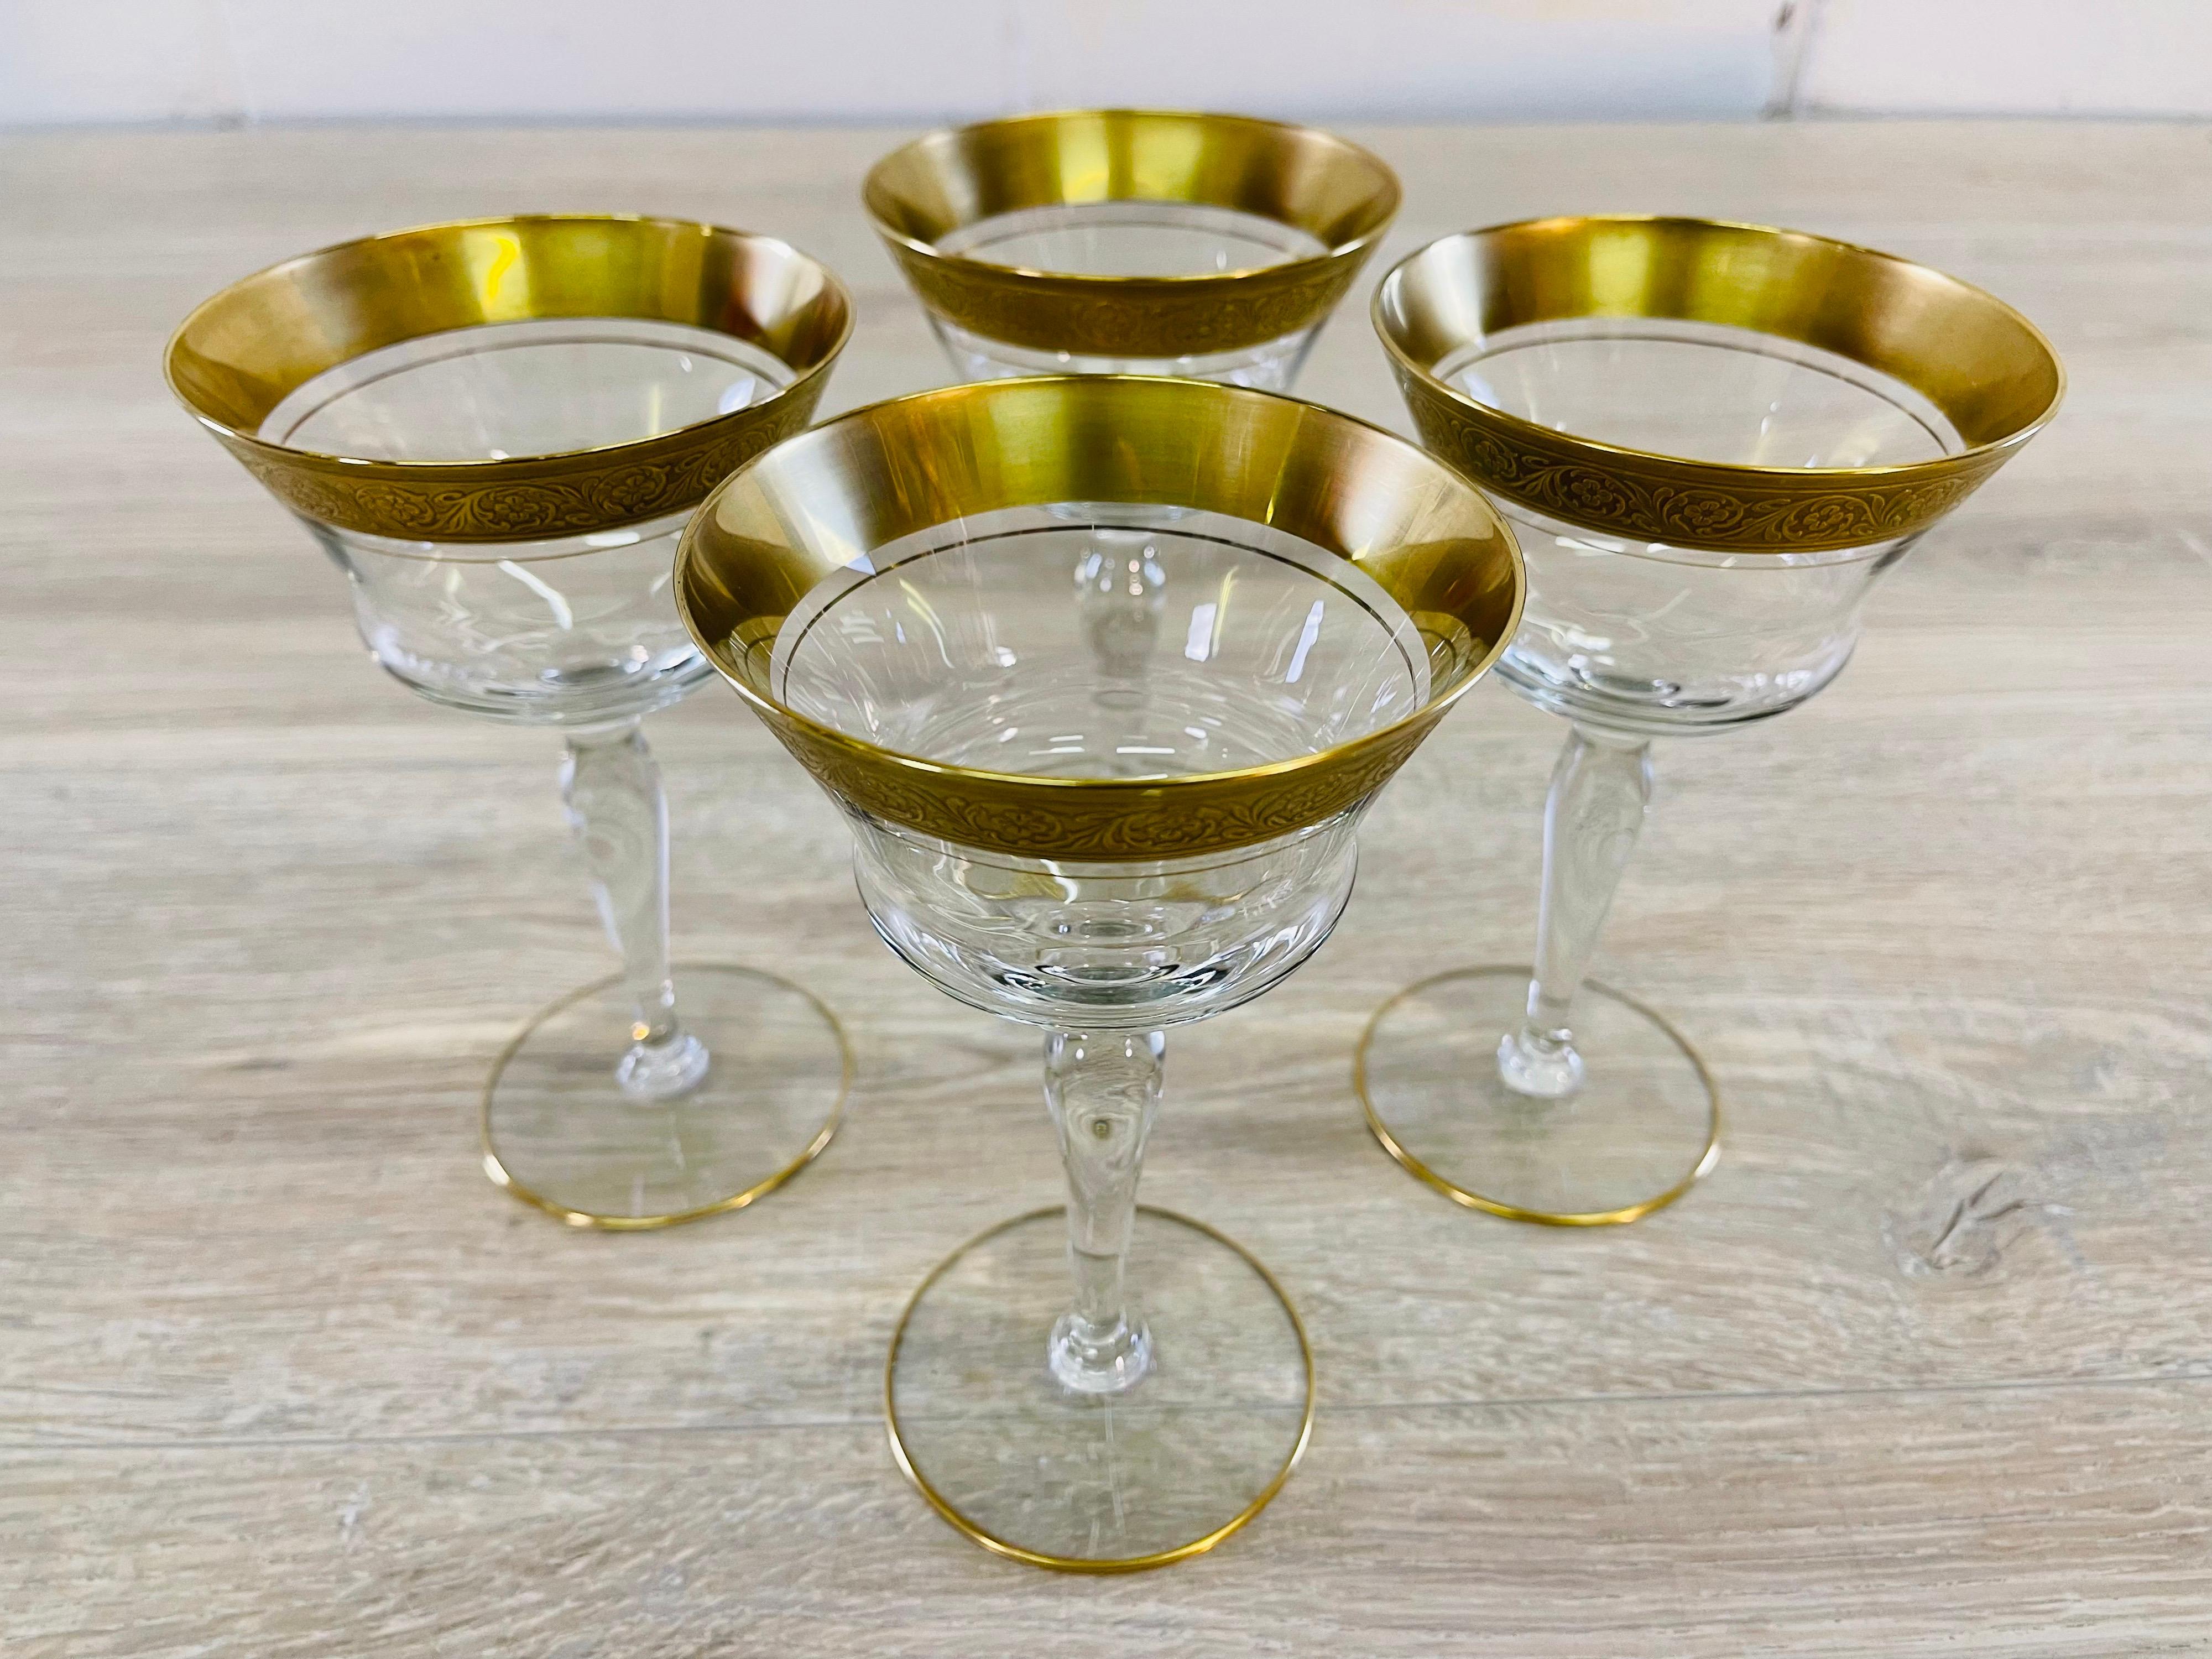 Vintage 1950s set of 4 Tiffin glass rambling rose gold rim coupe stems. No marks.